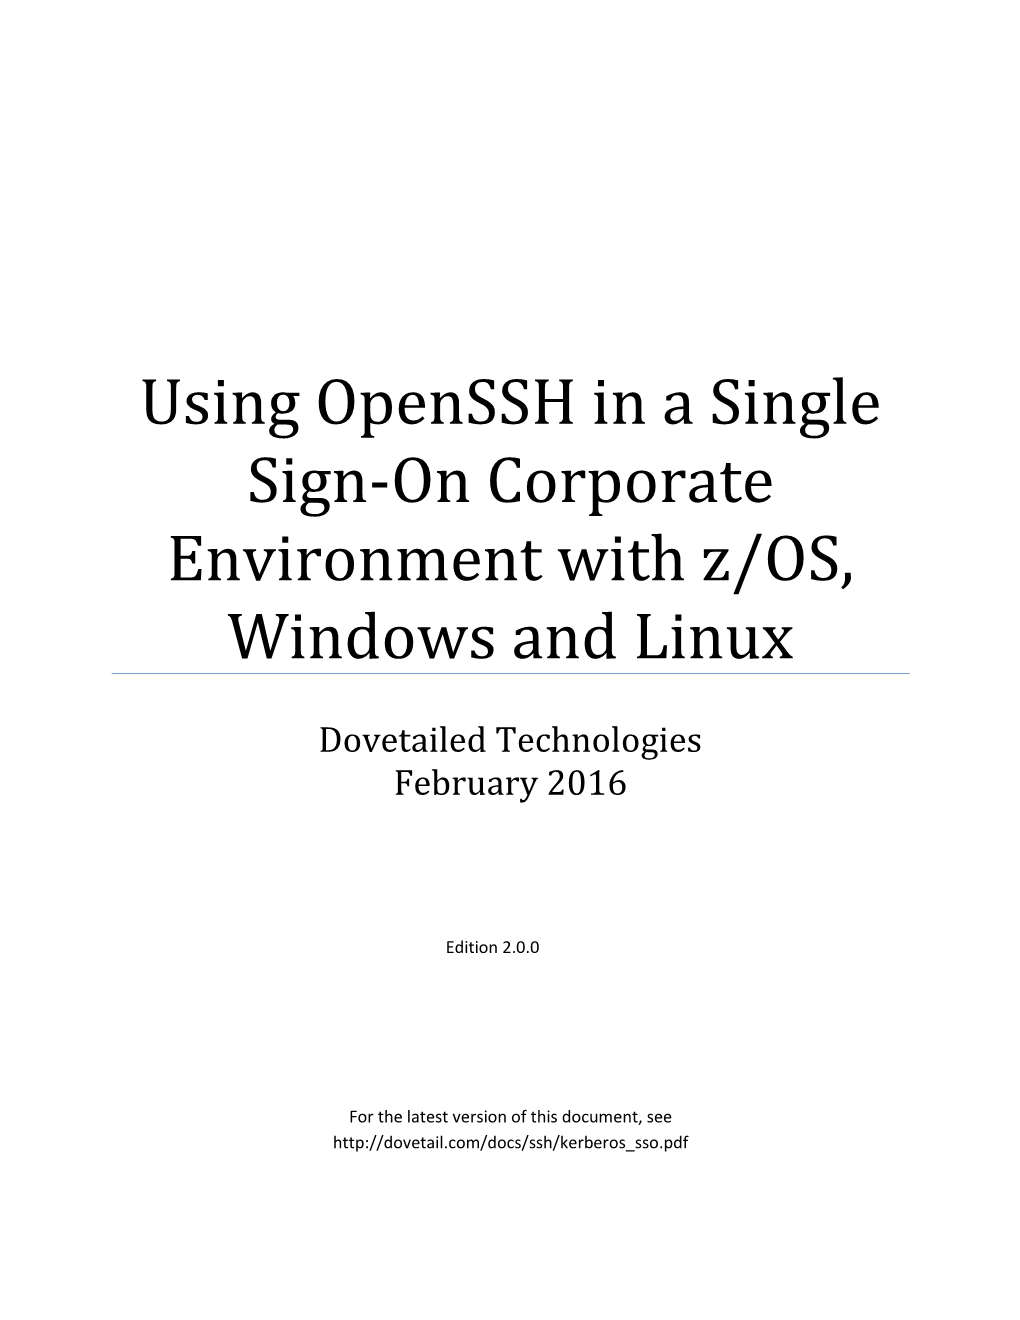 Using Openssh in a Single Sign-On Corporate Environment with Z/OS, Windows and Linux